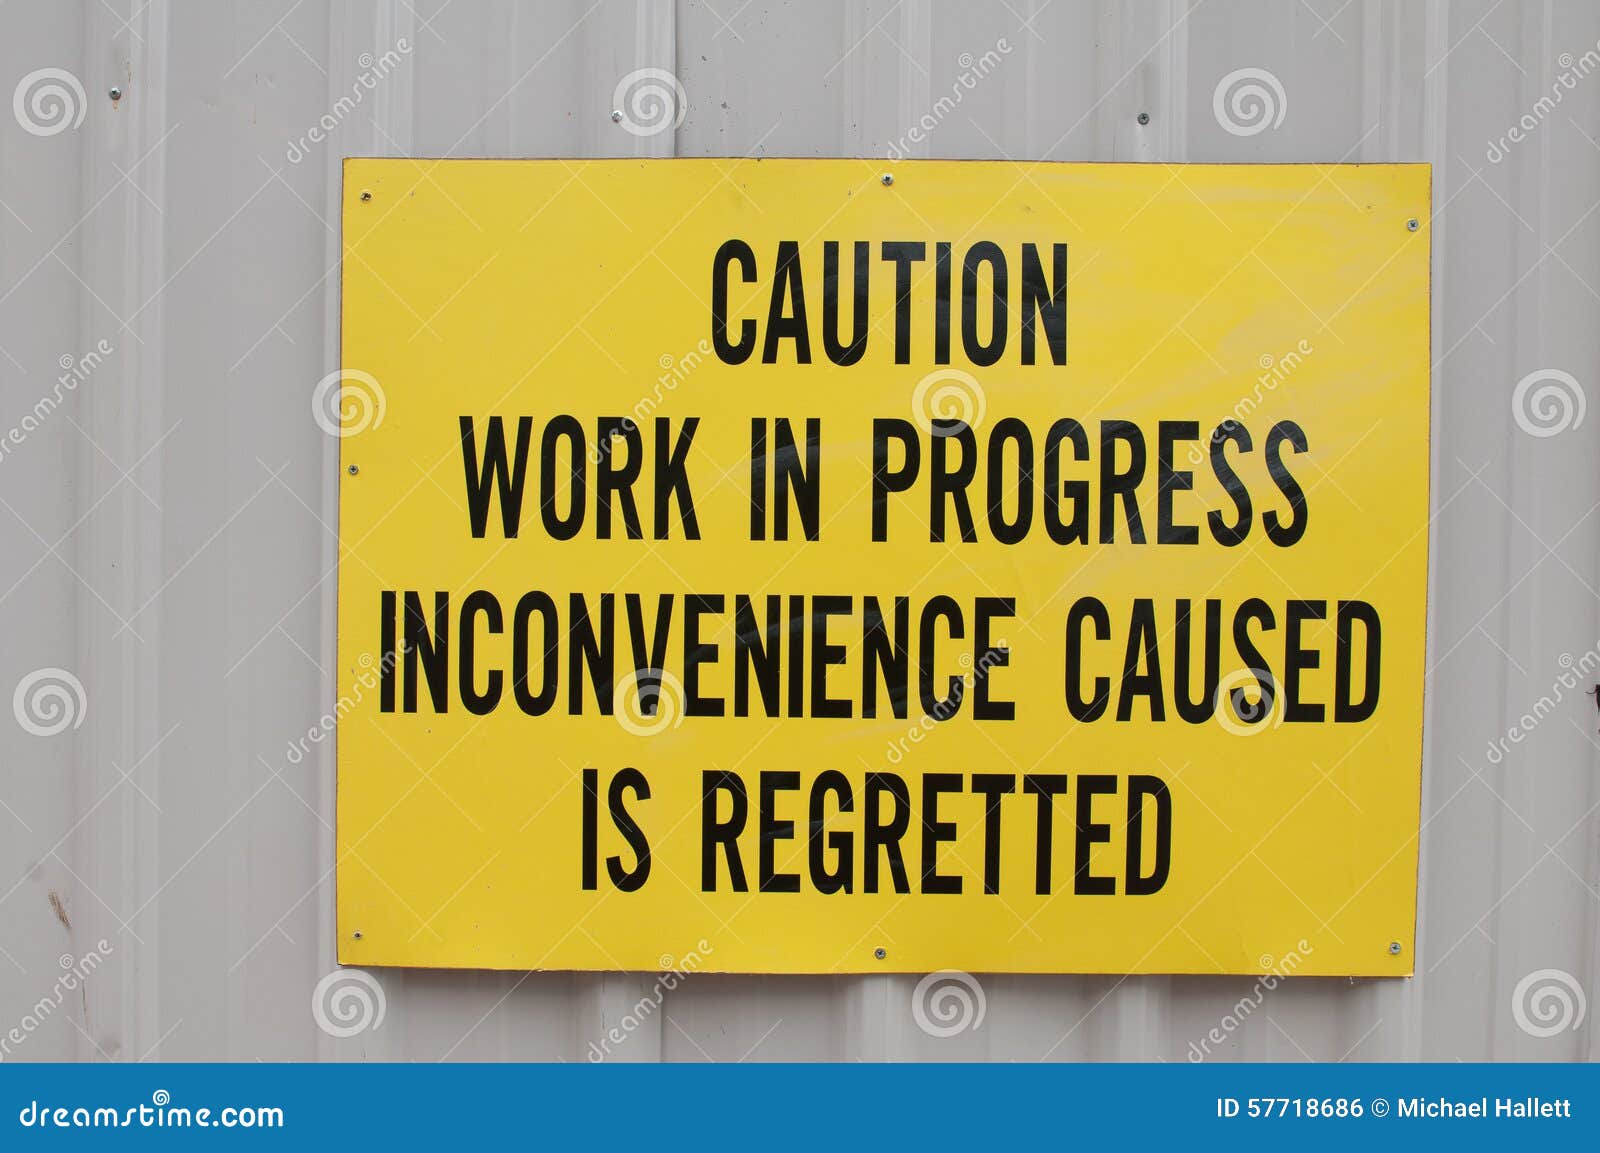 1 277 Caution Work Progress Photos Free Royalty Free Stock Photos From Dreamstime